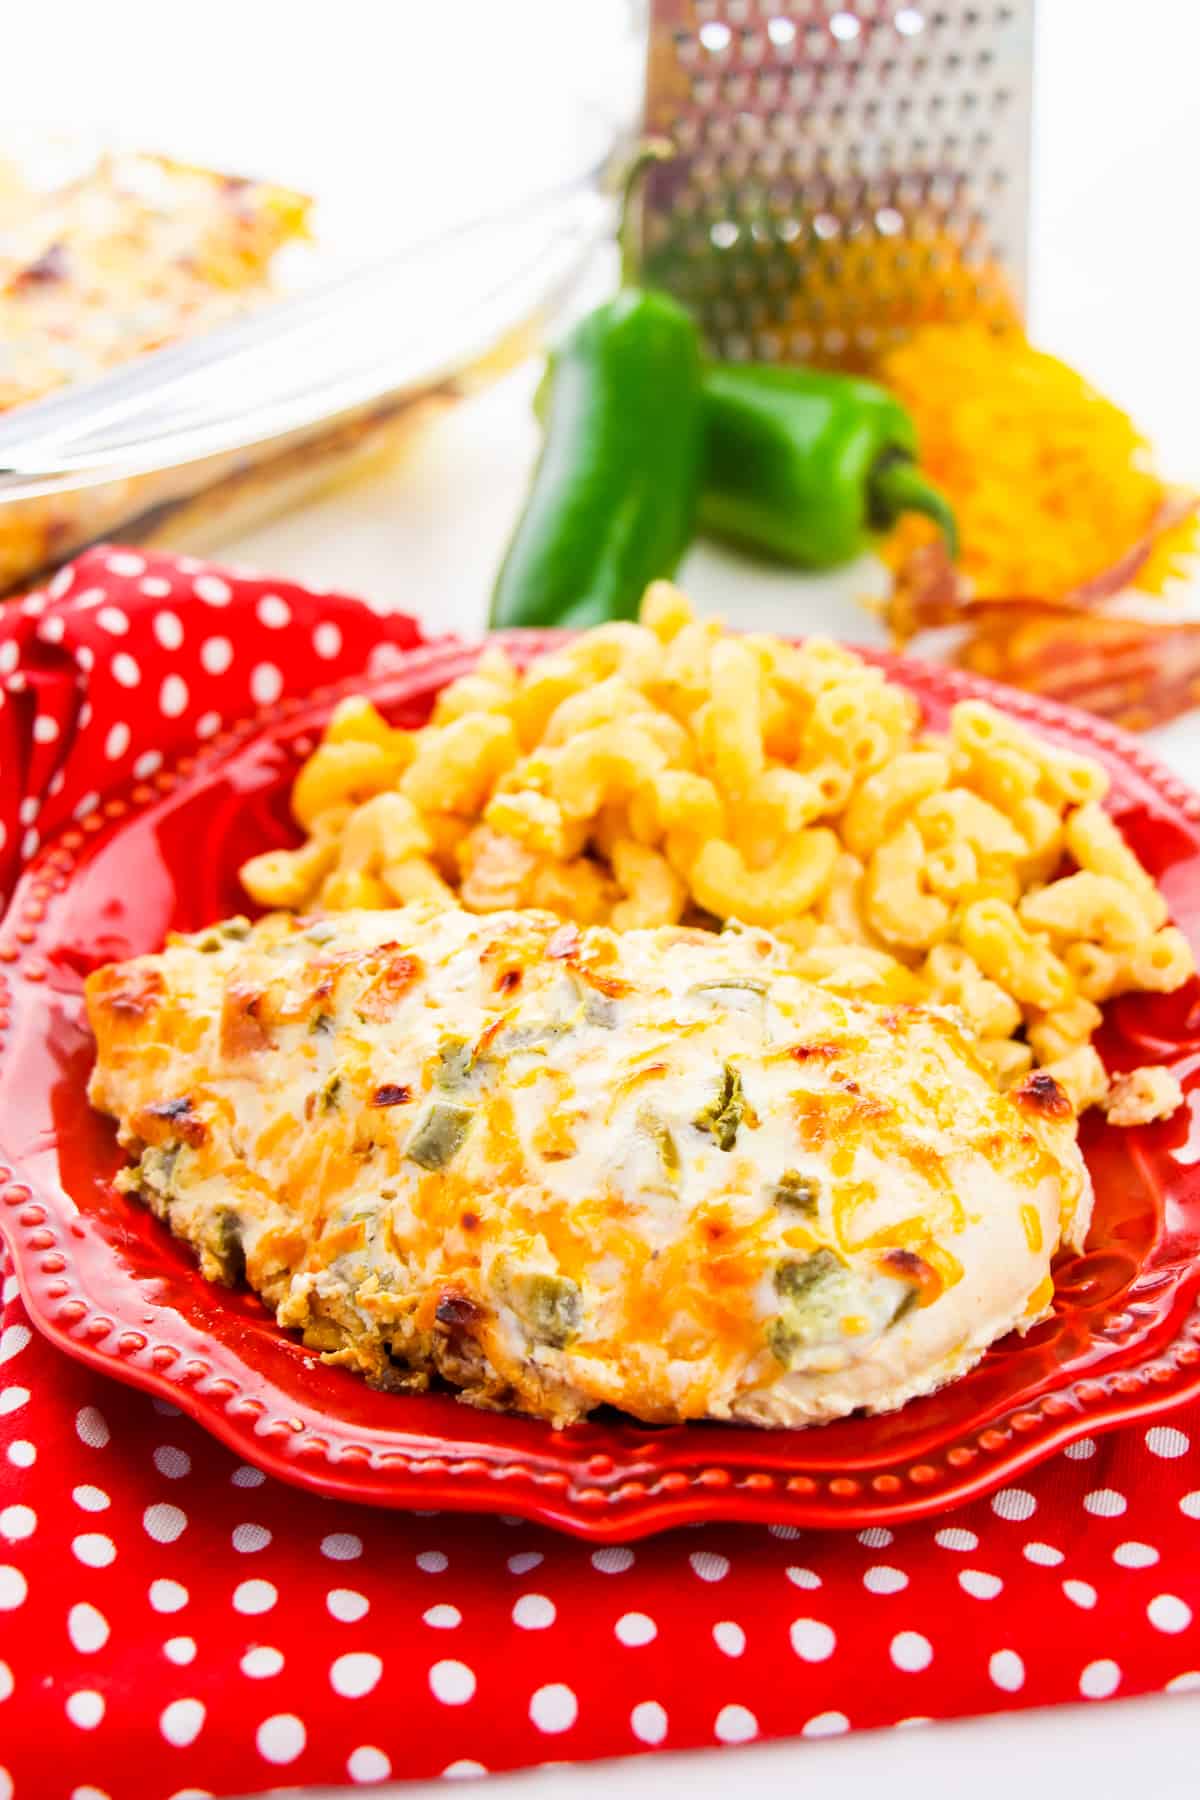 jalapeño popper chicken breast plated with side of macaroni and cheese. fresh jalapeno peppers and shredded cheese are in background